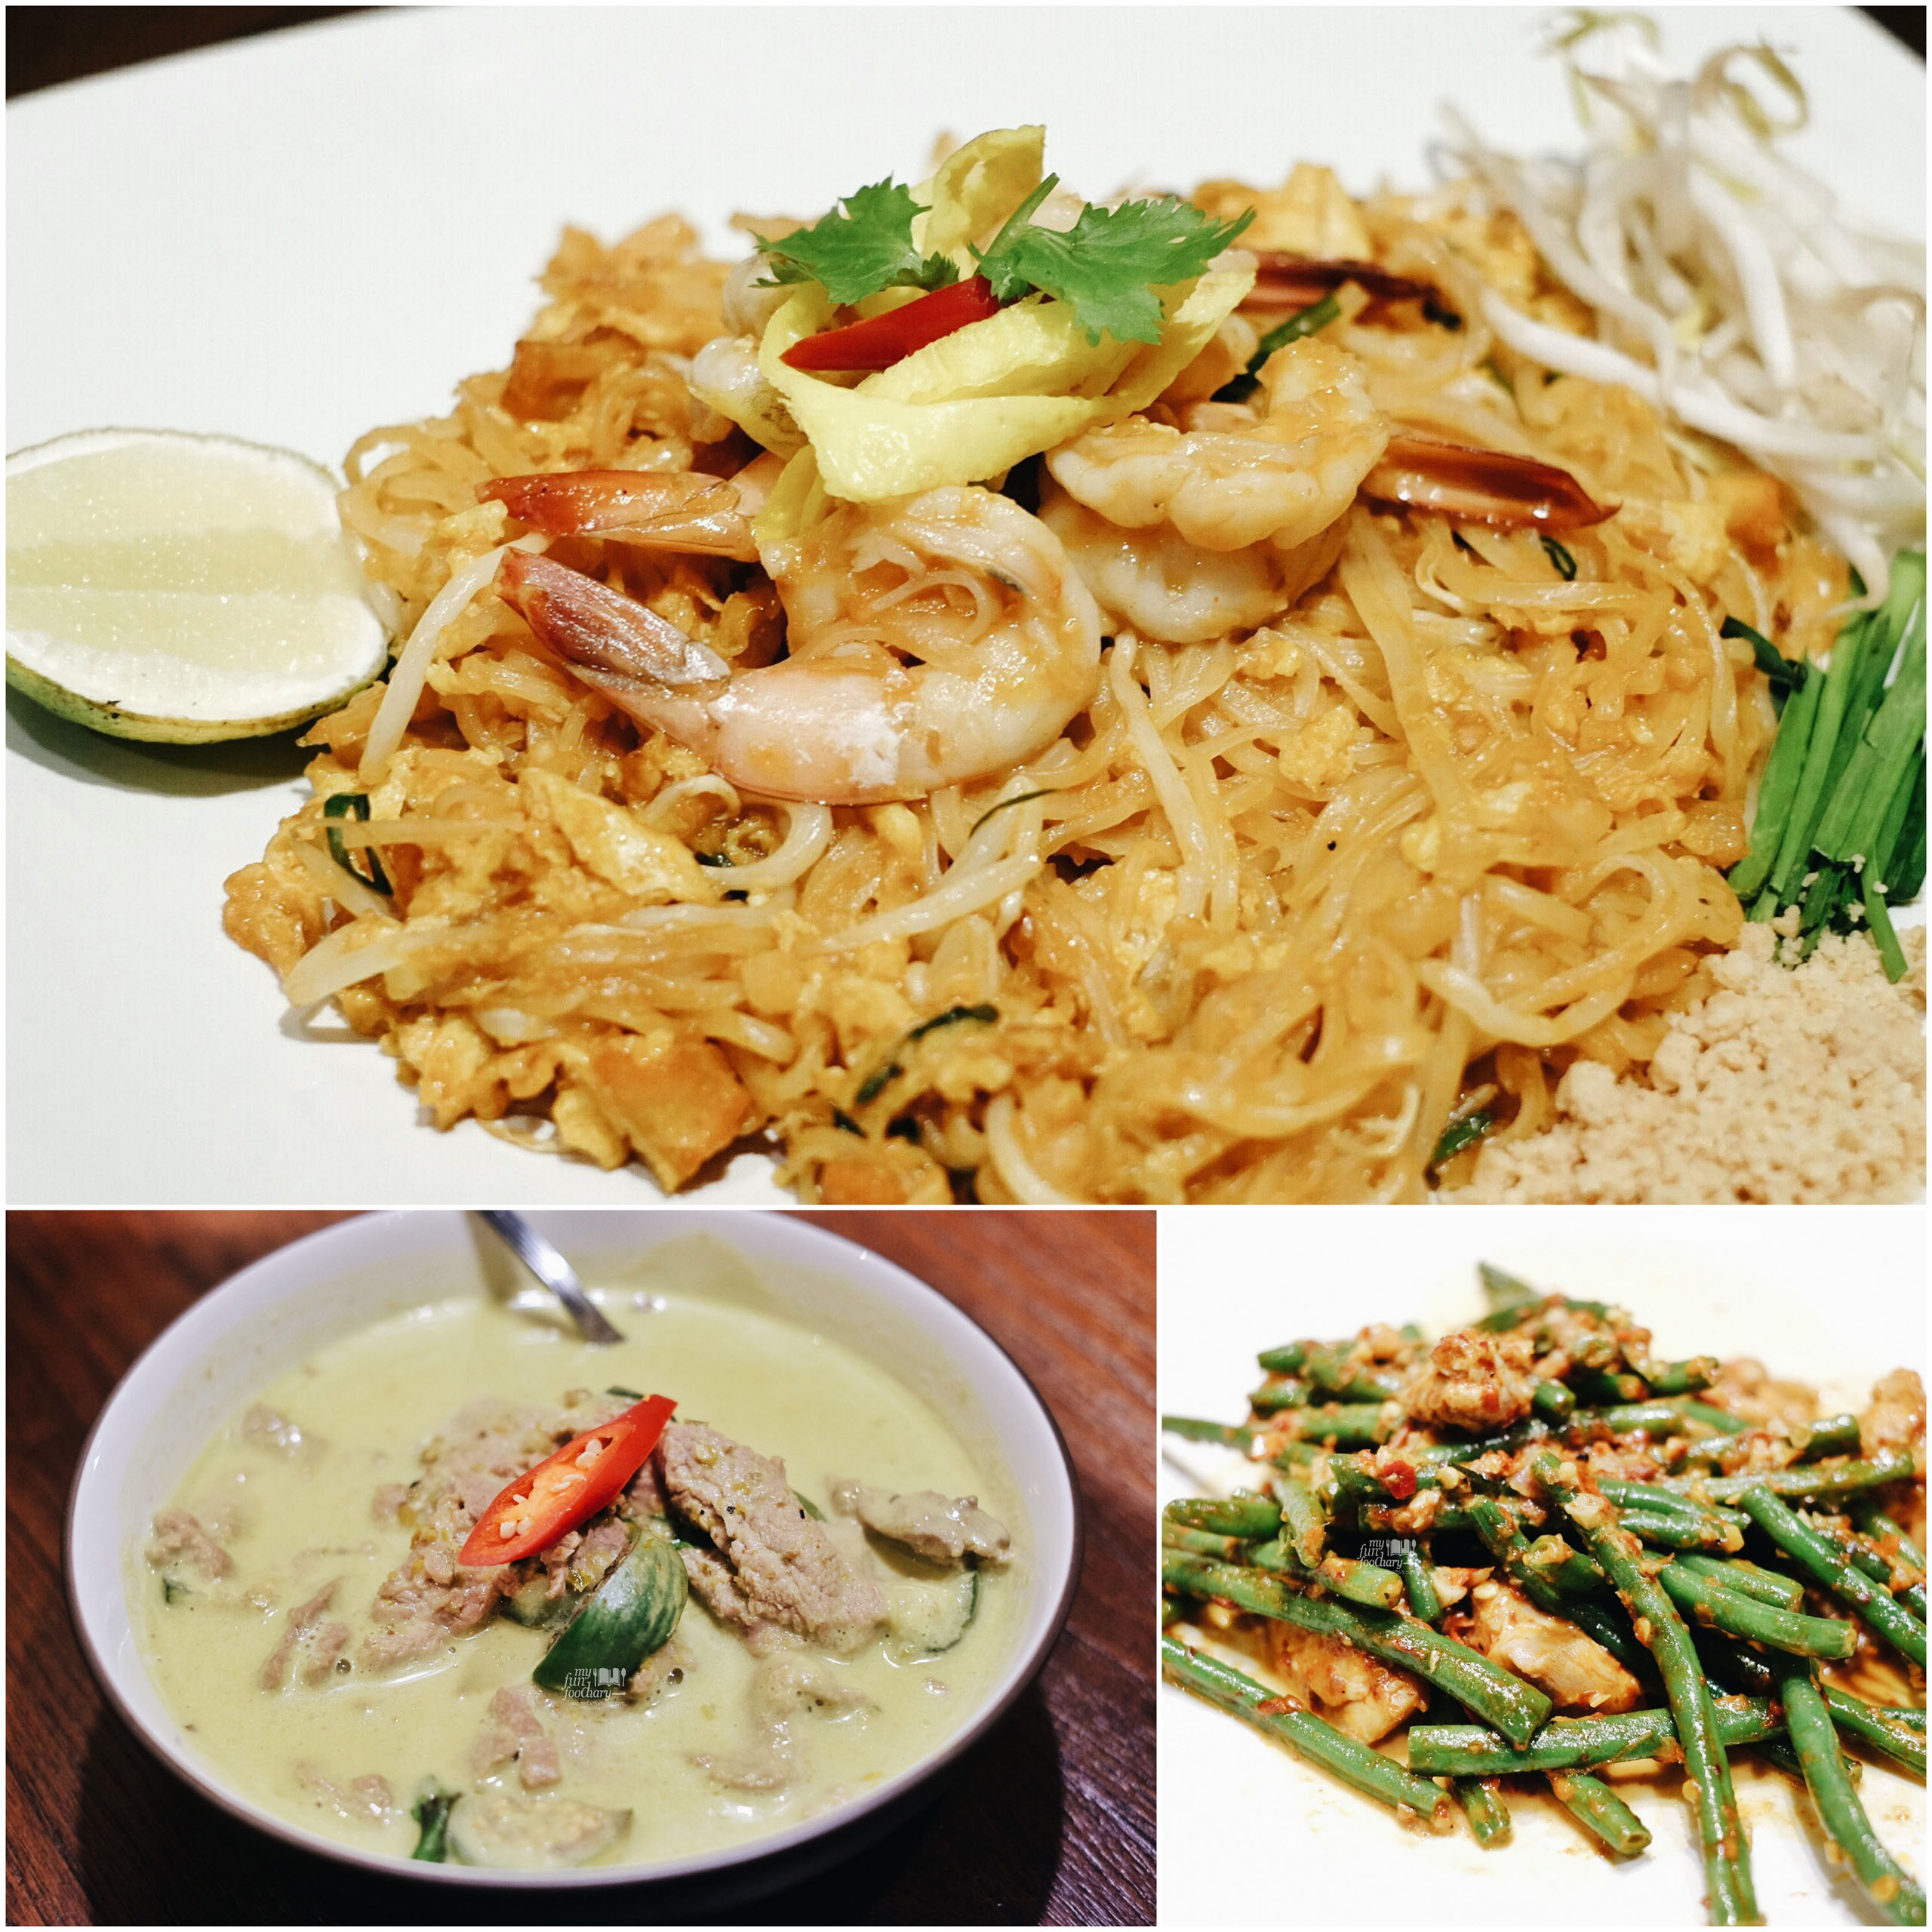 Pad Thai - Green Curry - Beans at Tom Tom PIK by Myfunfoodiary